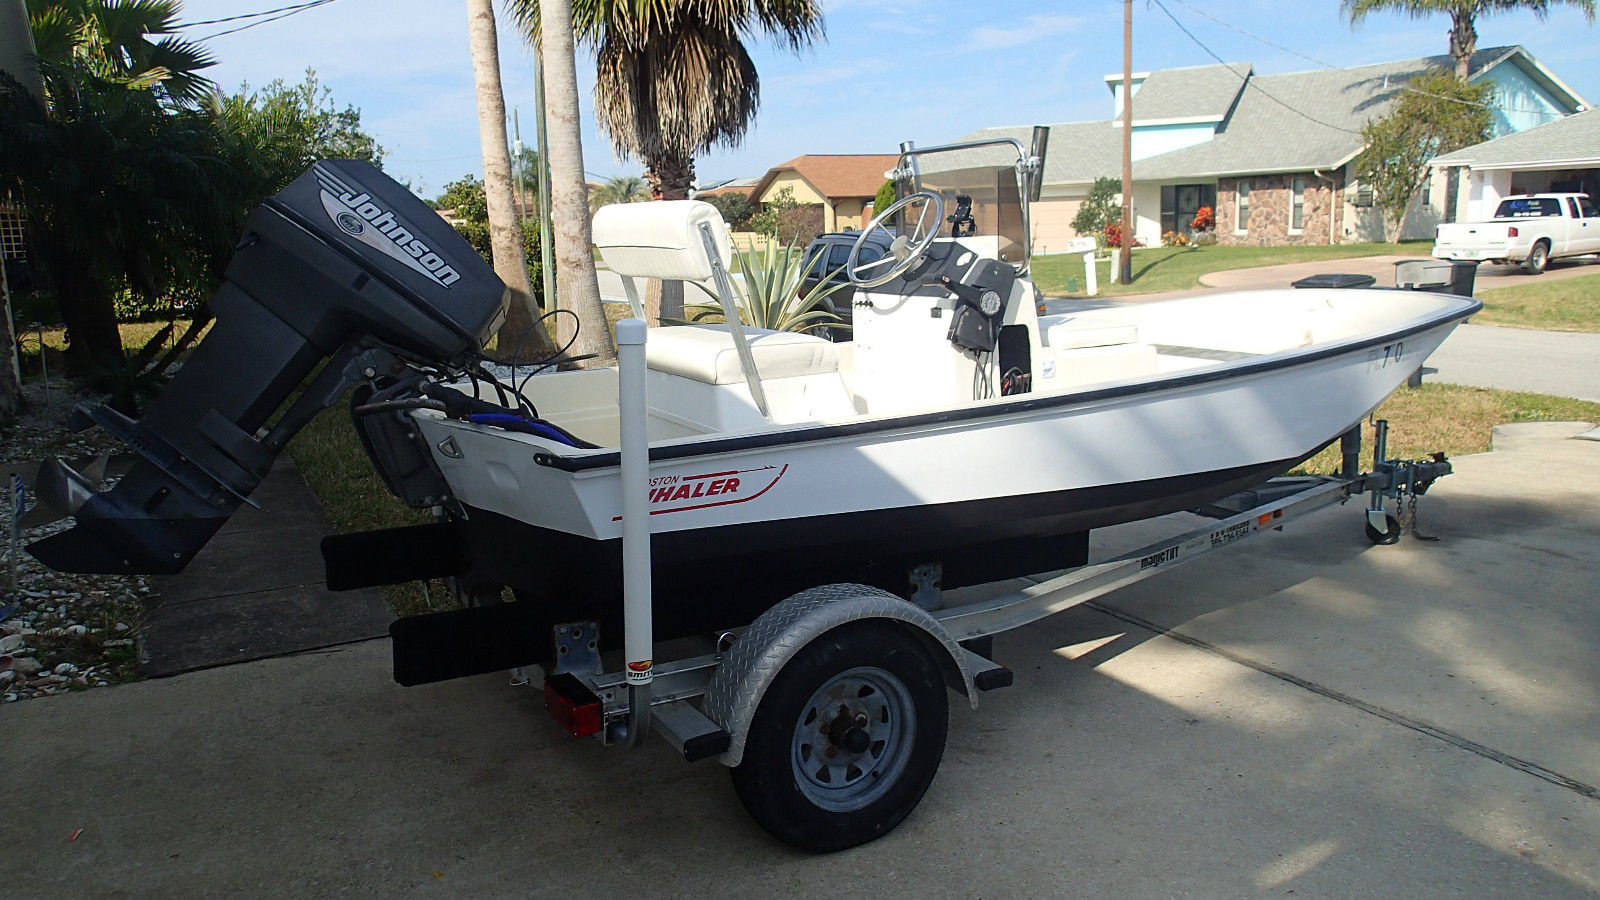 Boston Whaler 13 1975 for sale for $5,000 - Boats-from-USA.com